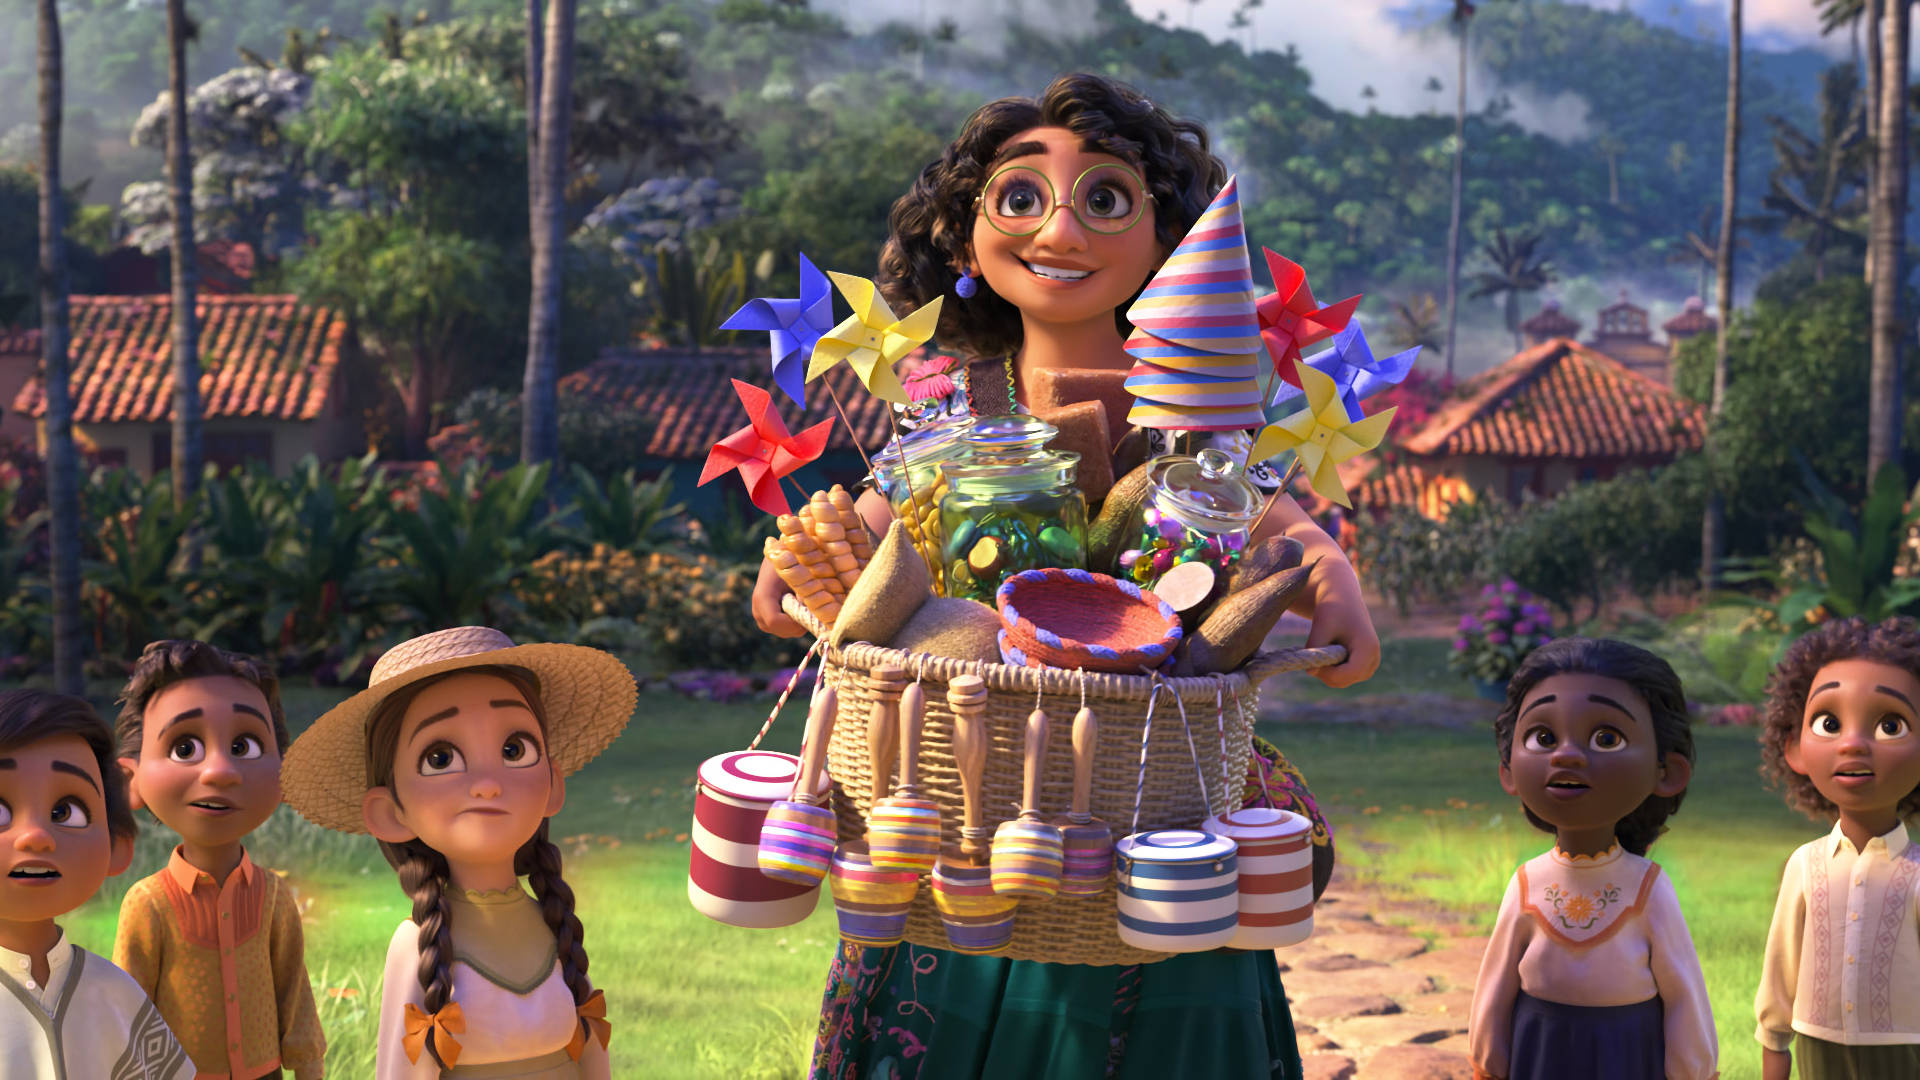 Mirabel Madrigal from Encanto animated movie, carrying gifts with joy. Wallpaper